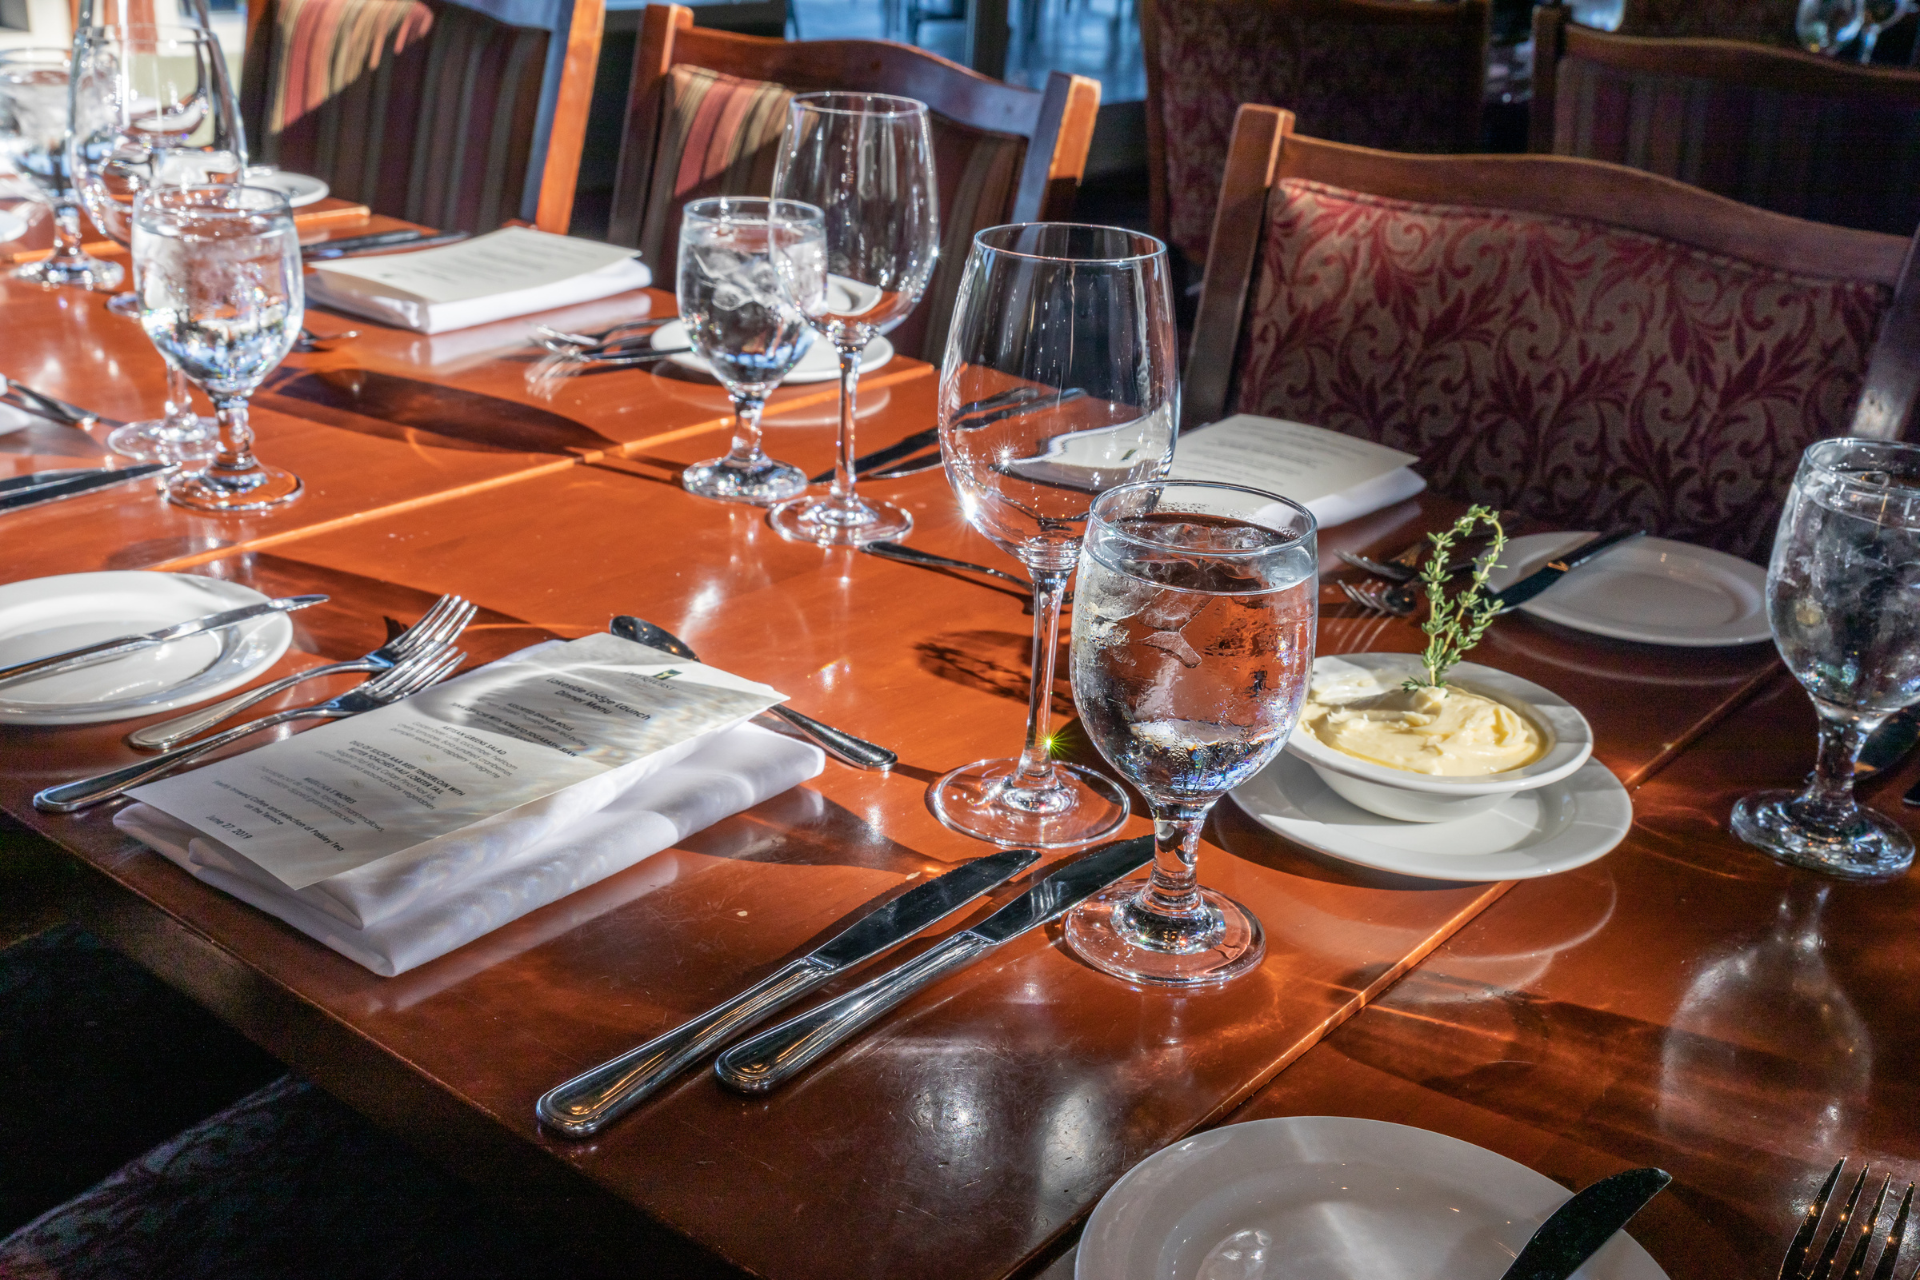 A table set with water glasses and menus